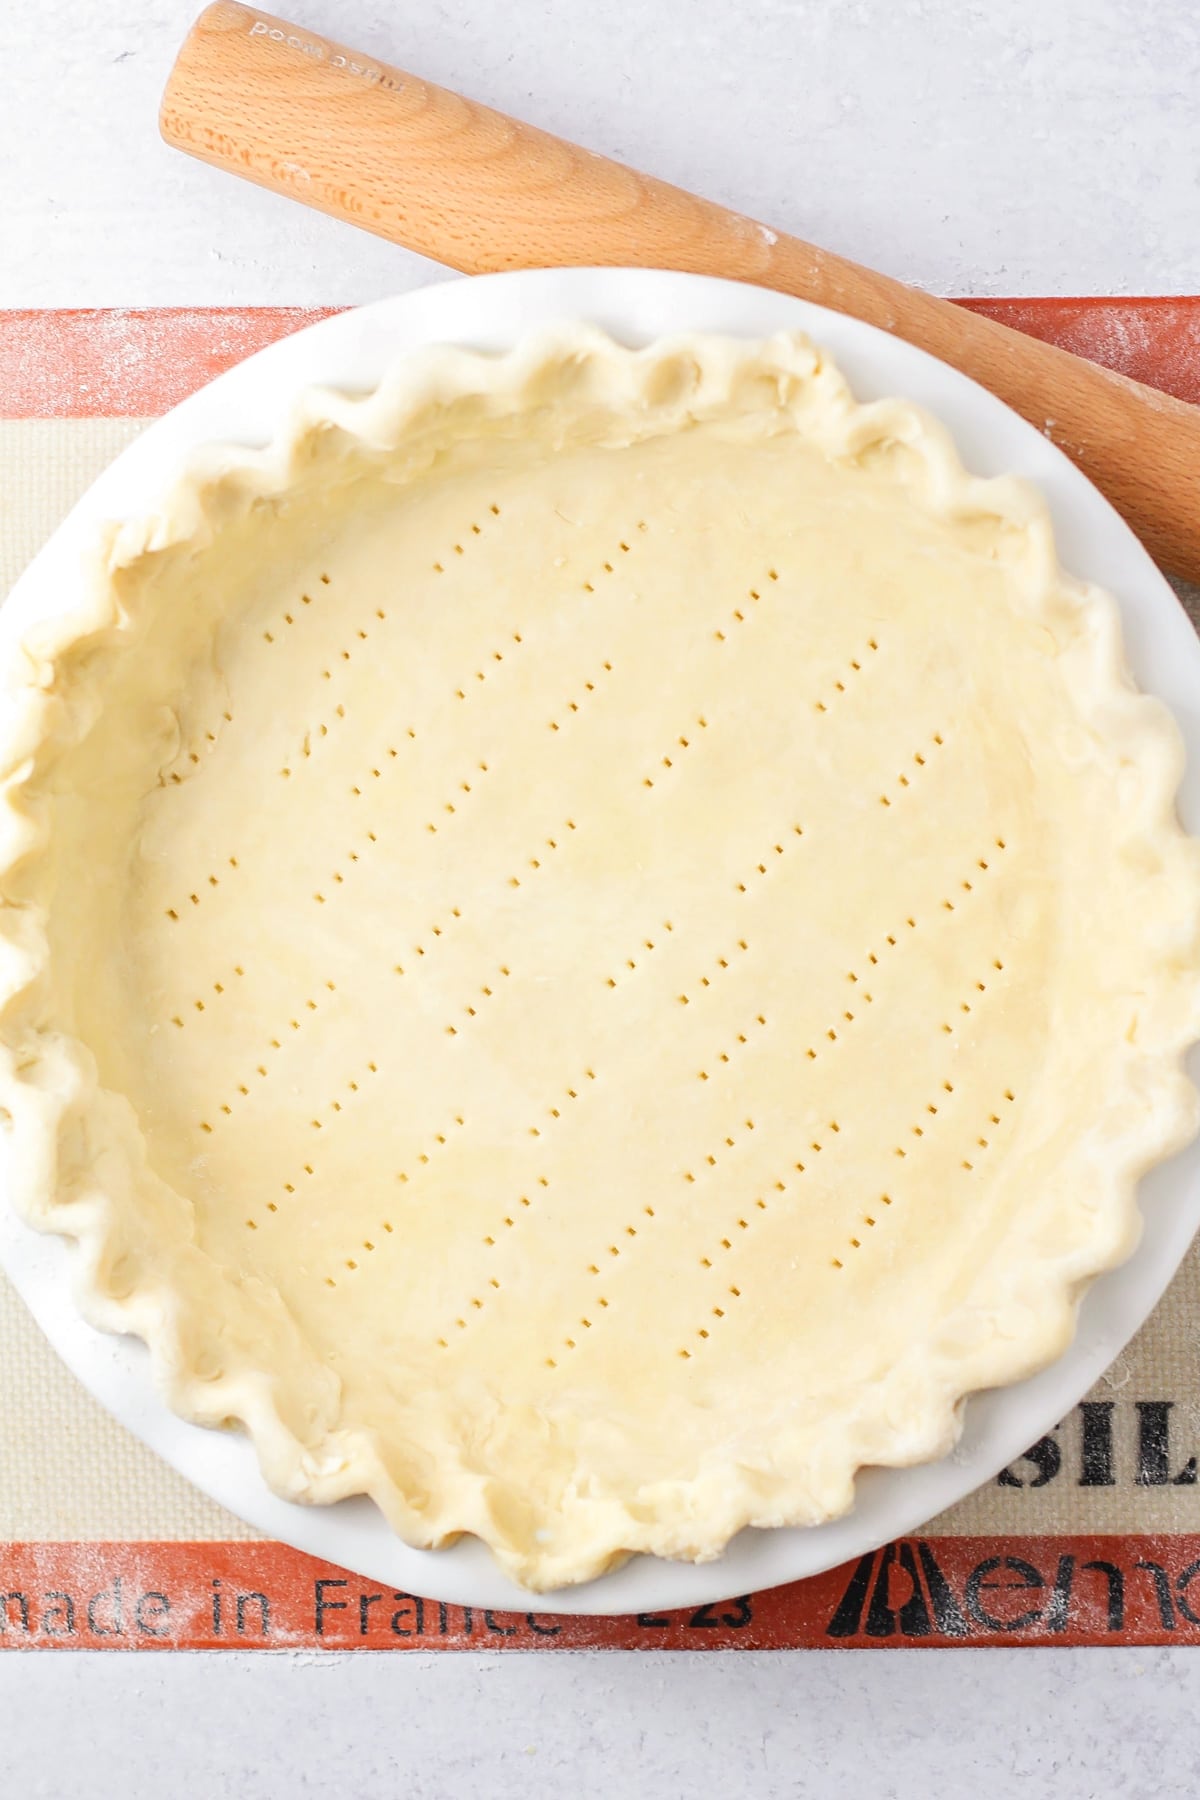 Prepared easy pie crust recipe in a baking dish ready for filling.